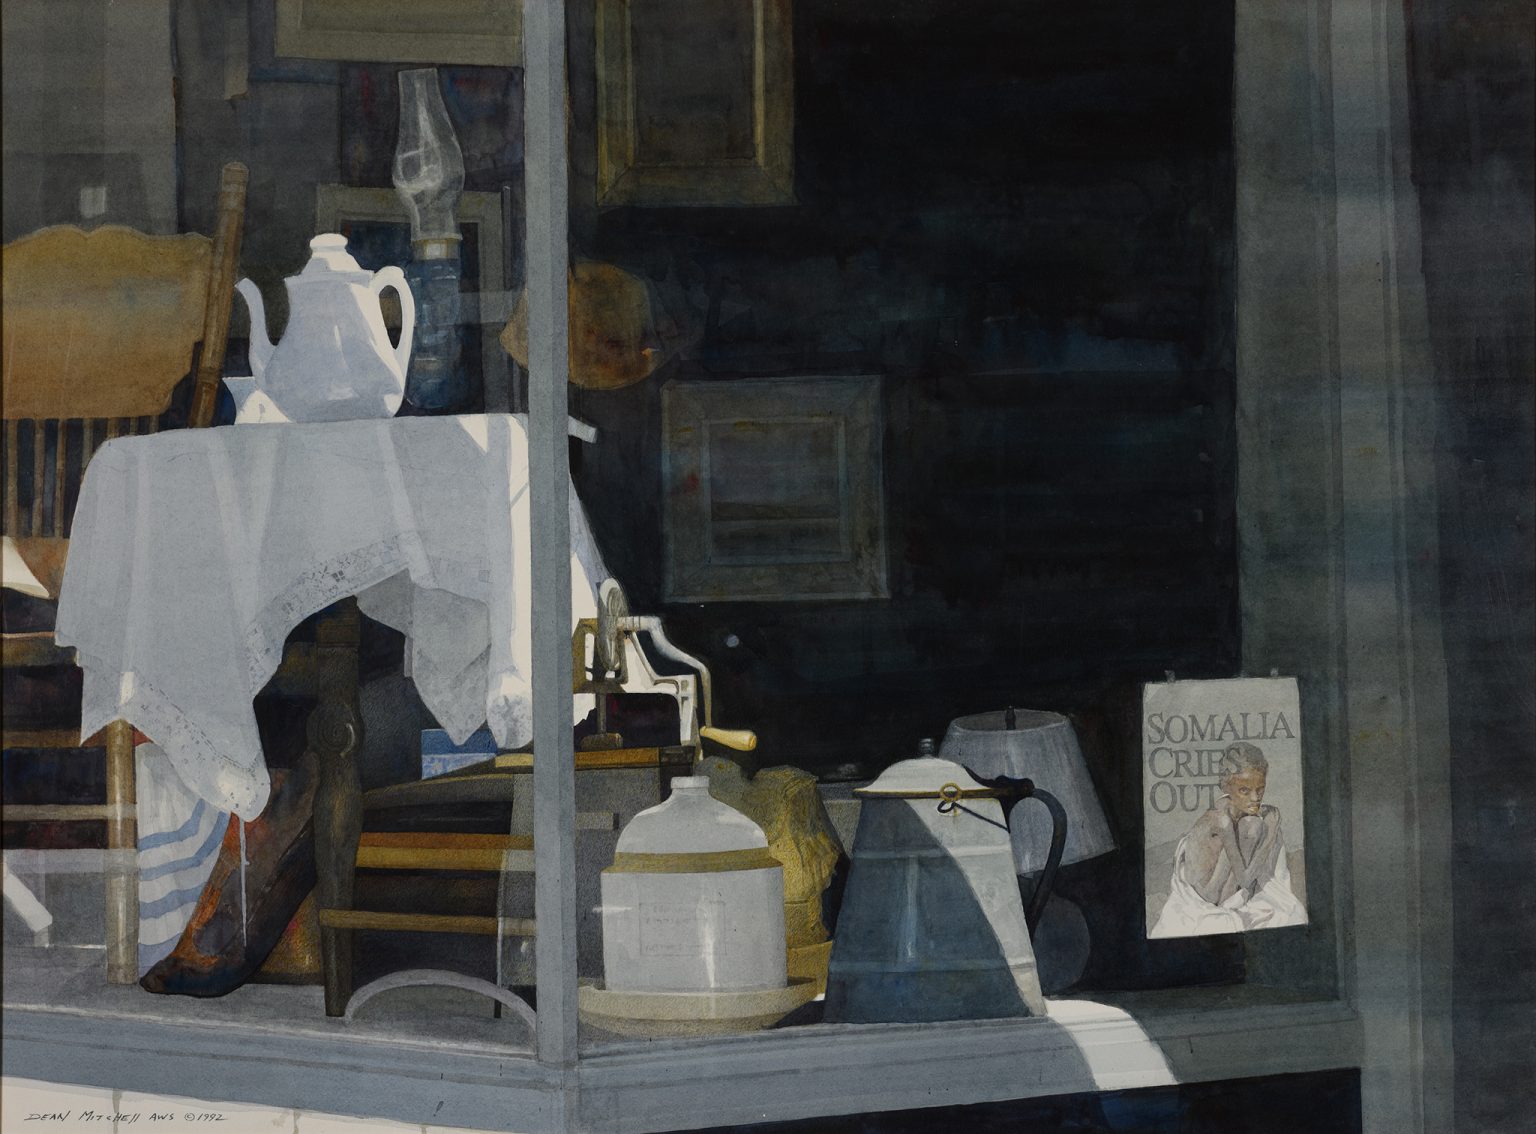 ‘Signs of the Times,’ a 1992 piece by Dean Mitchell, was given to the University Museum by Melody and John Maxey. The painting is included in the museum’s ‘Recent Acquisitions’ exhibit.